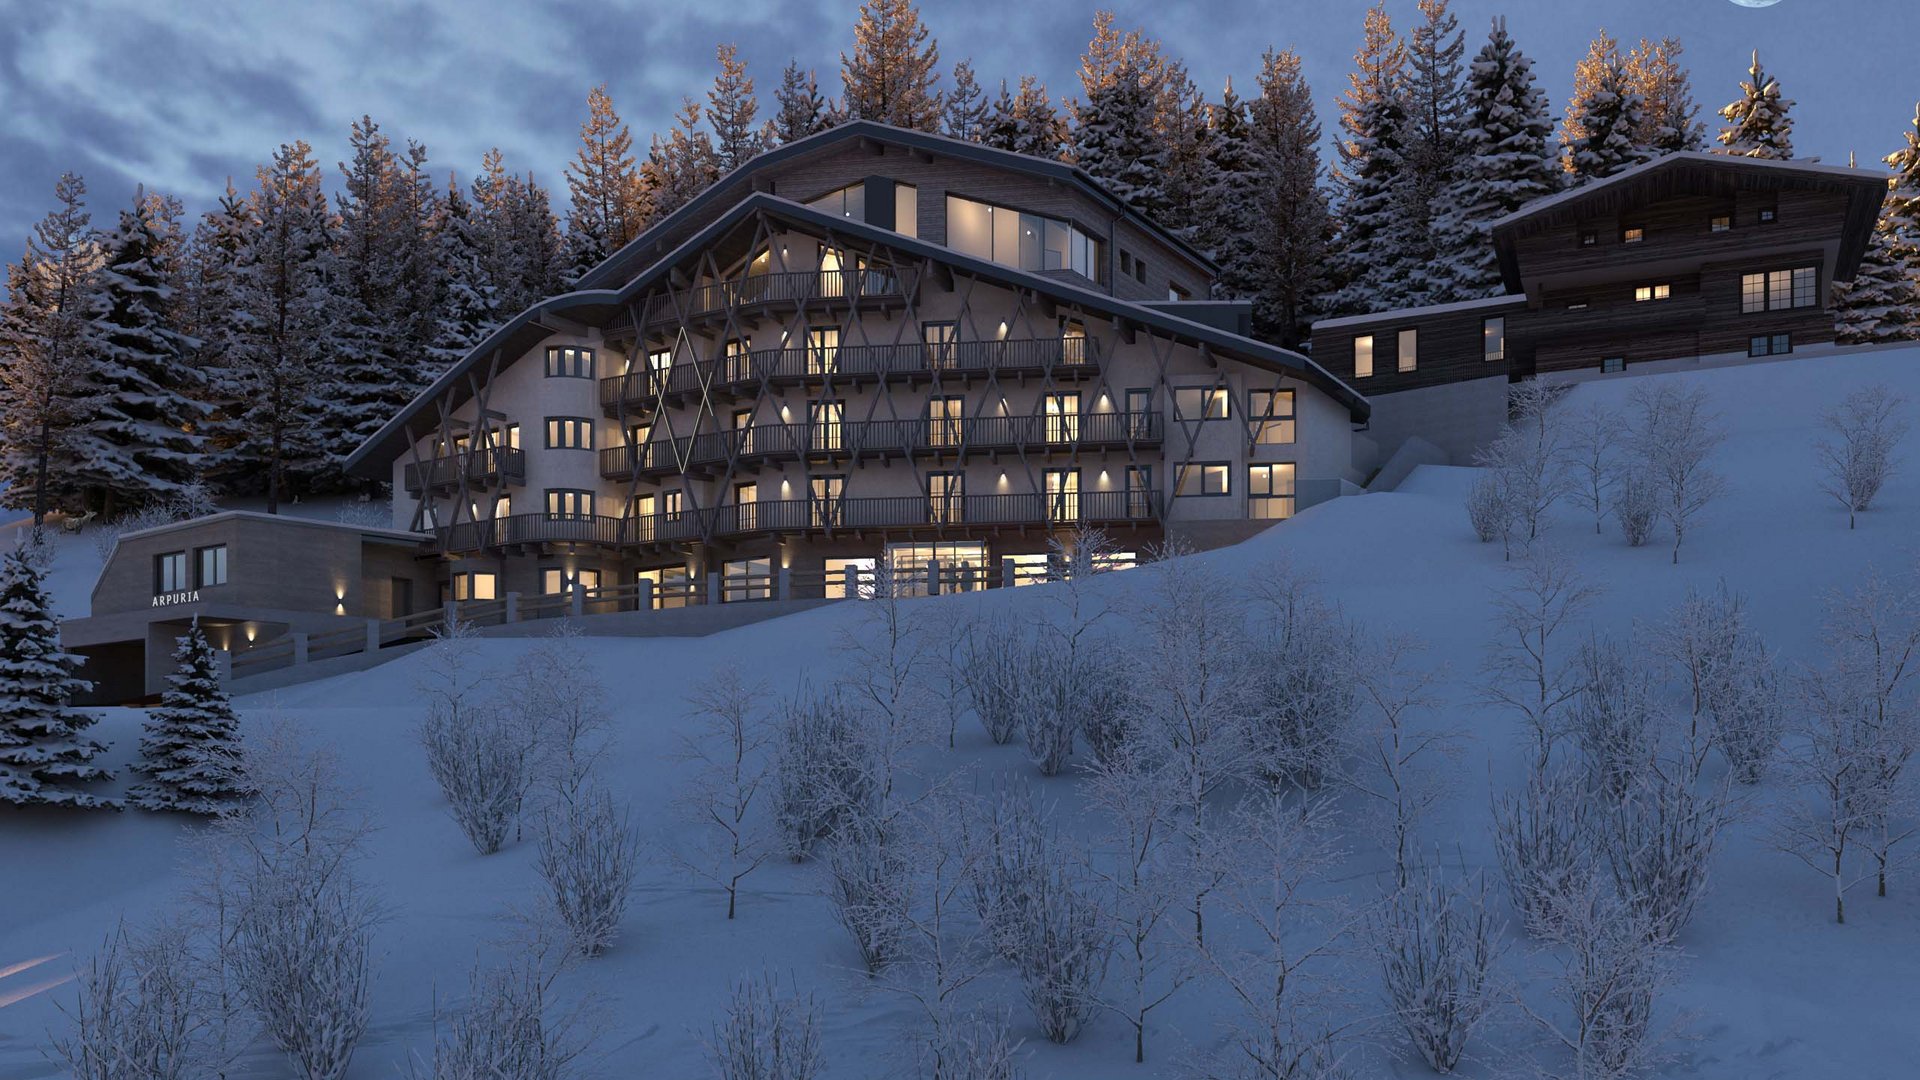 Welcome to Arlberg and to your hotel in St. Anton